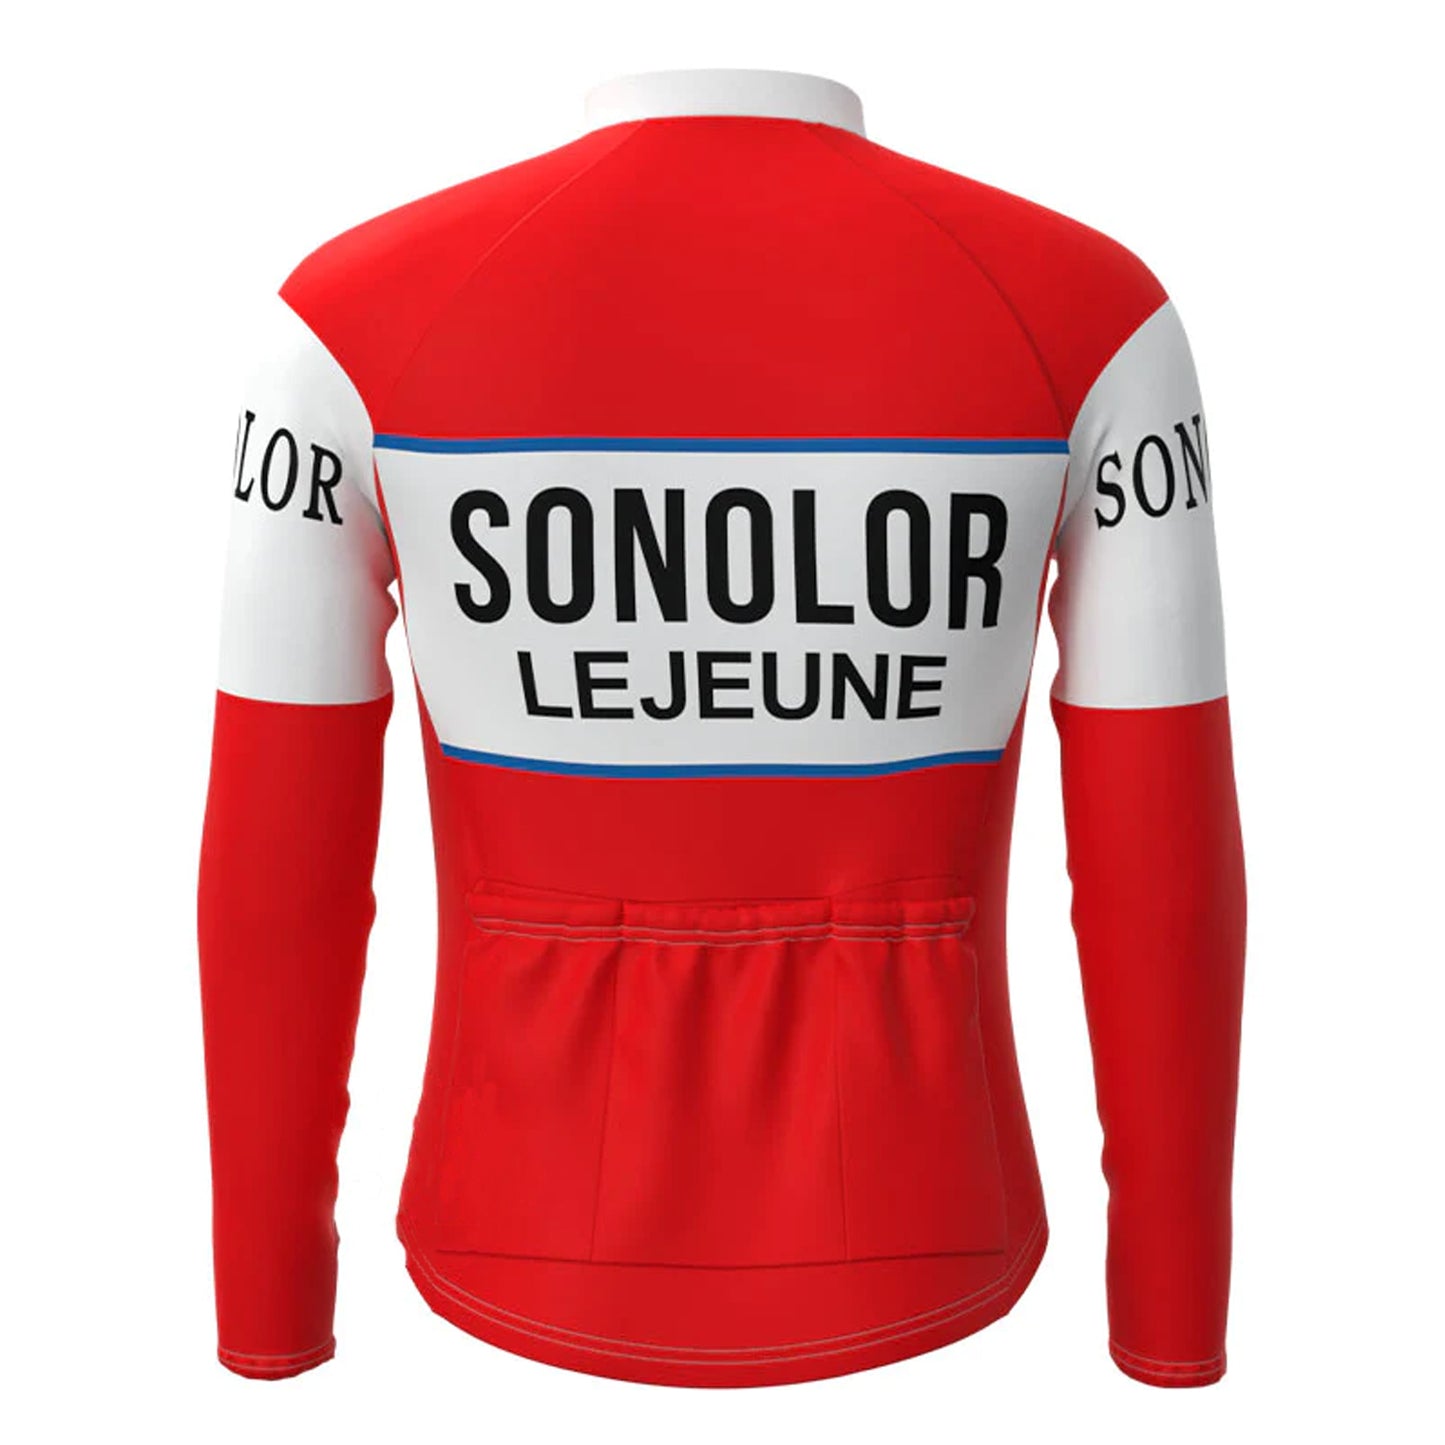 SONOLOR Lejeune Red Vintage Long Sleeve Cycling Jersey Top